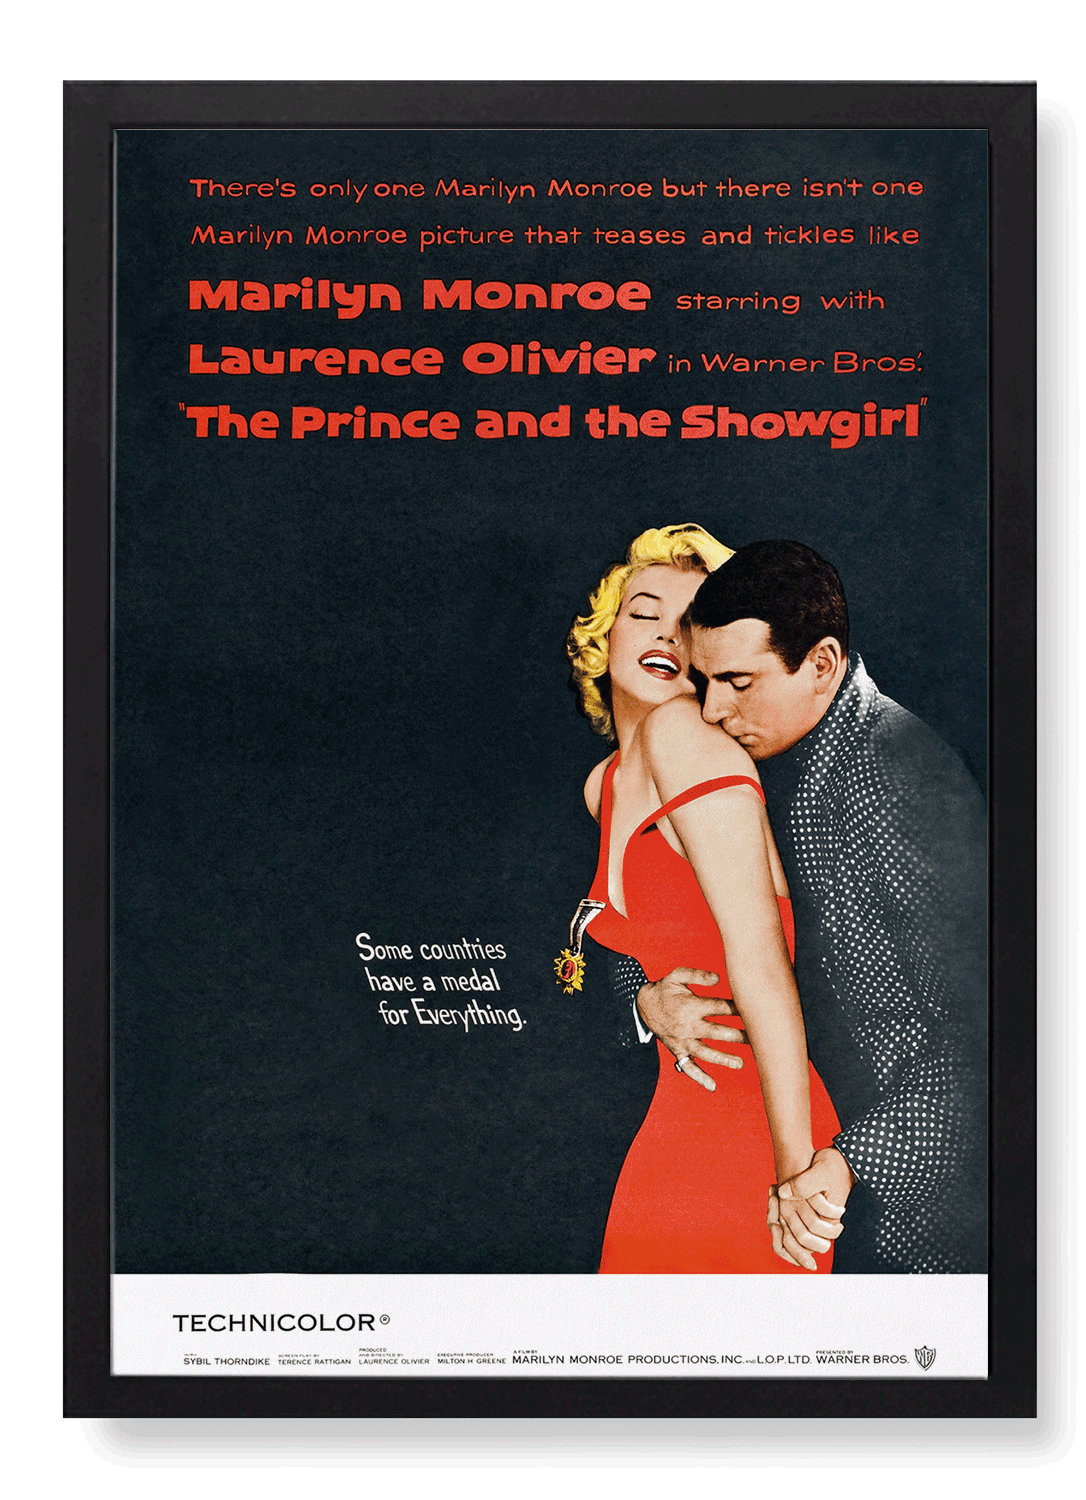 THE PRINCE AND THE SHOWGIRL (1957)